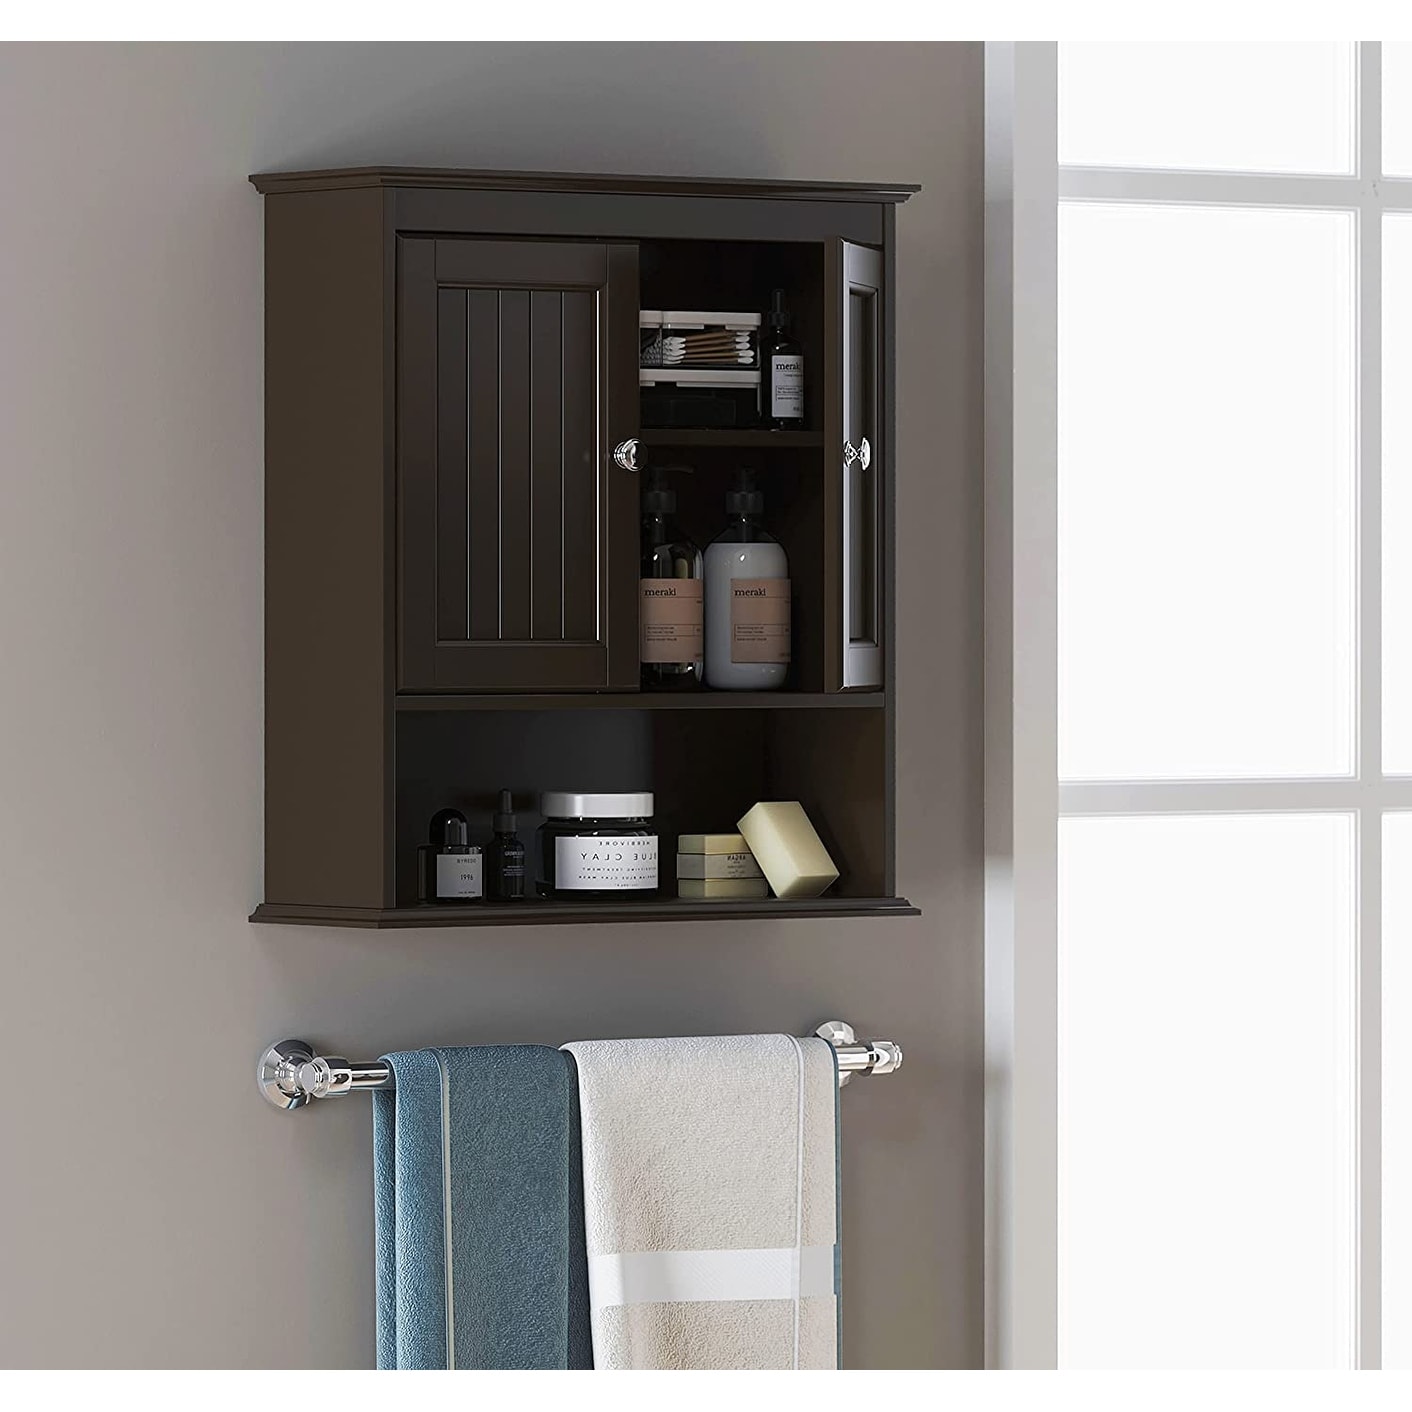 https://ak1.ostkcdn.com/images/products/is/images/direct/f13855388c58901a87a07b39aed6dd59ca43a9bb/Spirich-Bathroom-Wall-Spacesaver-Storage-Cabinet-Over-The-Toilet-with-Door-%2C-Wooden%2C-White.jpg